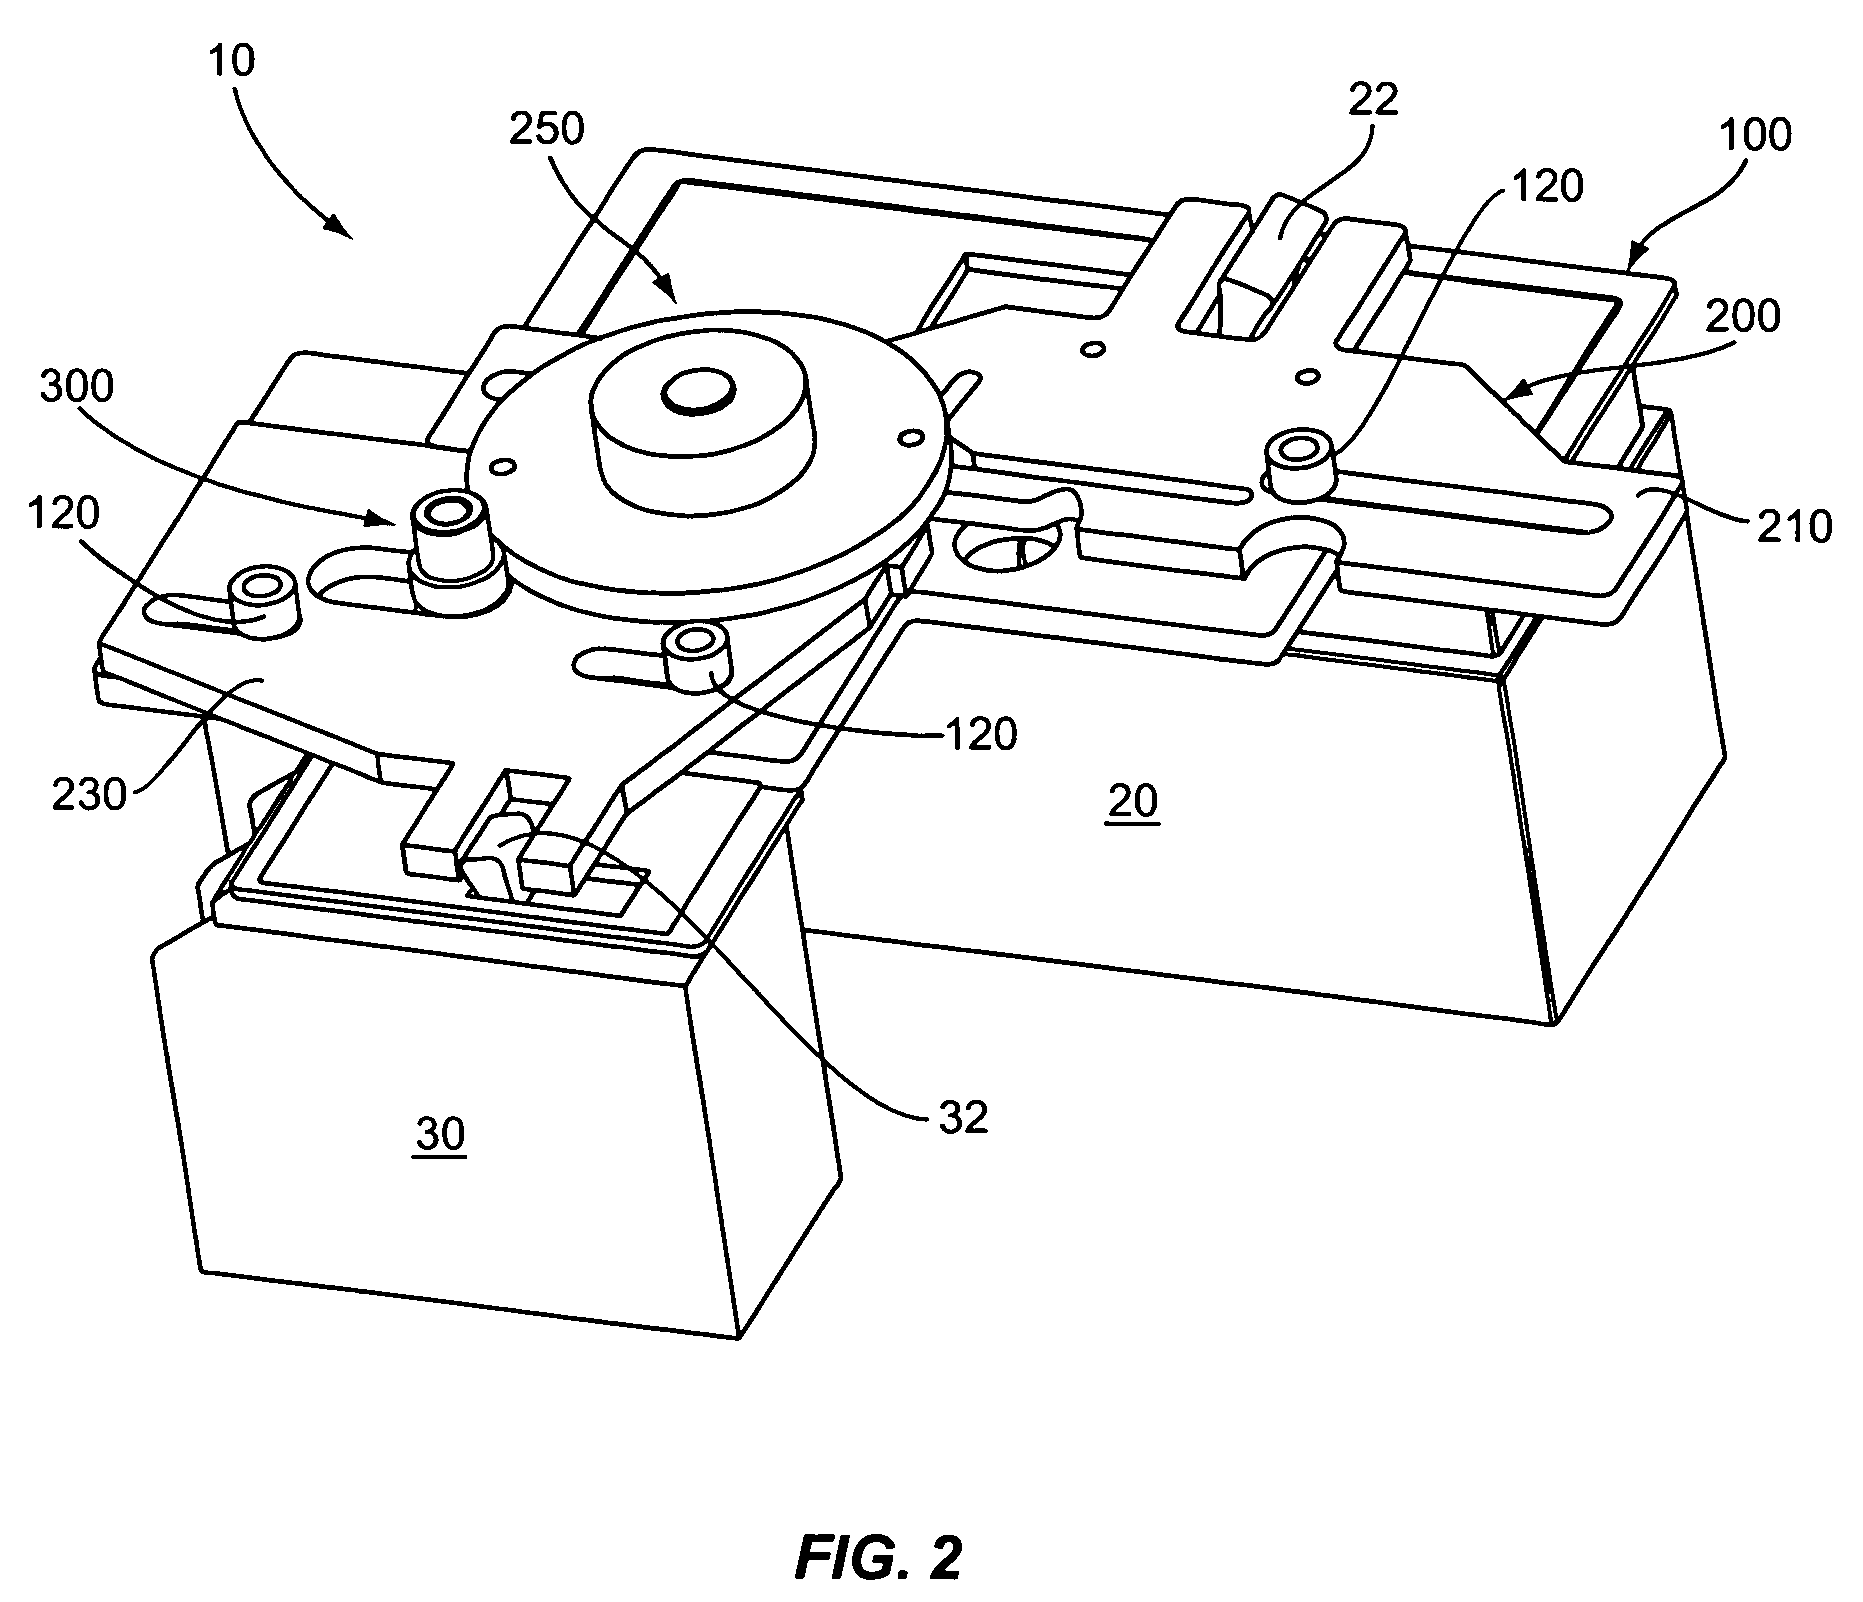 Switching mechanism with mechanical interlocking and manual override